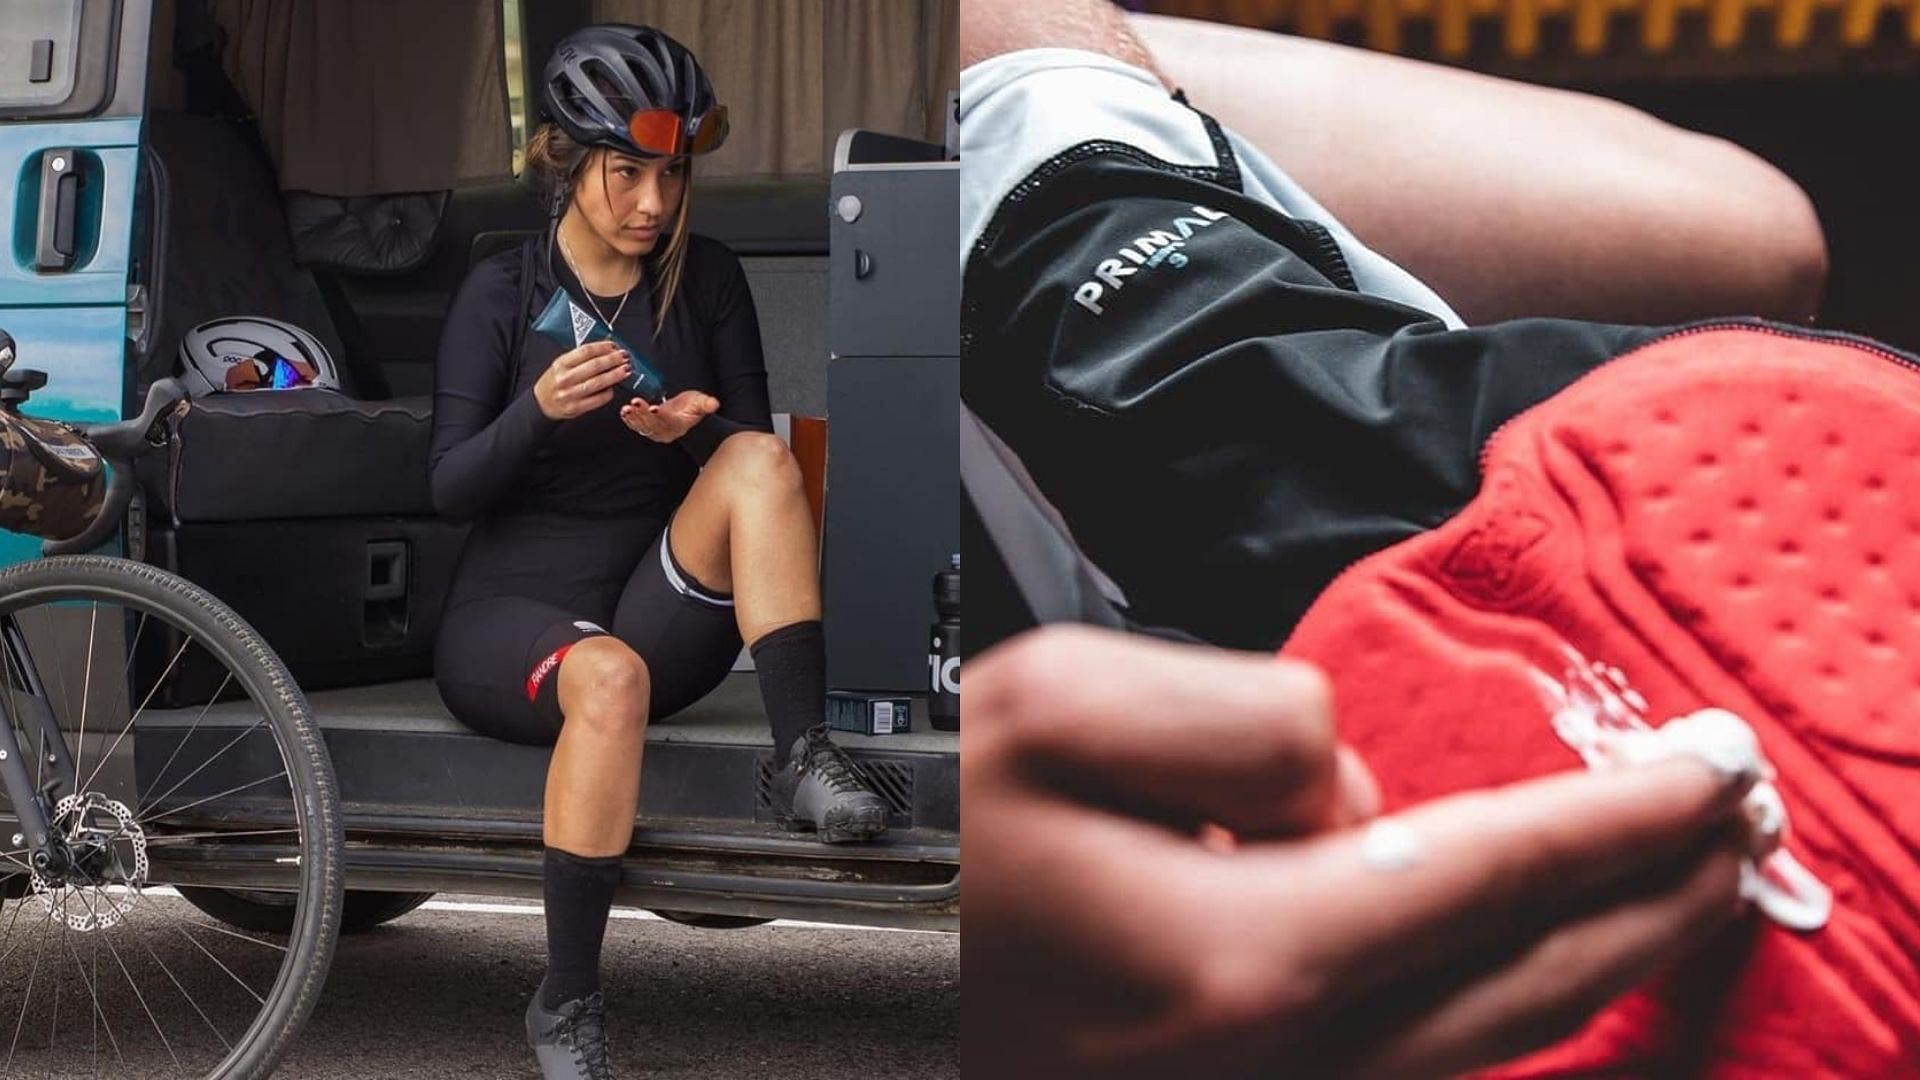 Embrocation vs chamois cream (Image via @primaleurope, @bend36official/ Instagram)